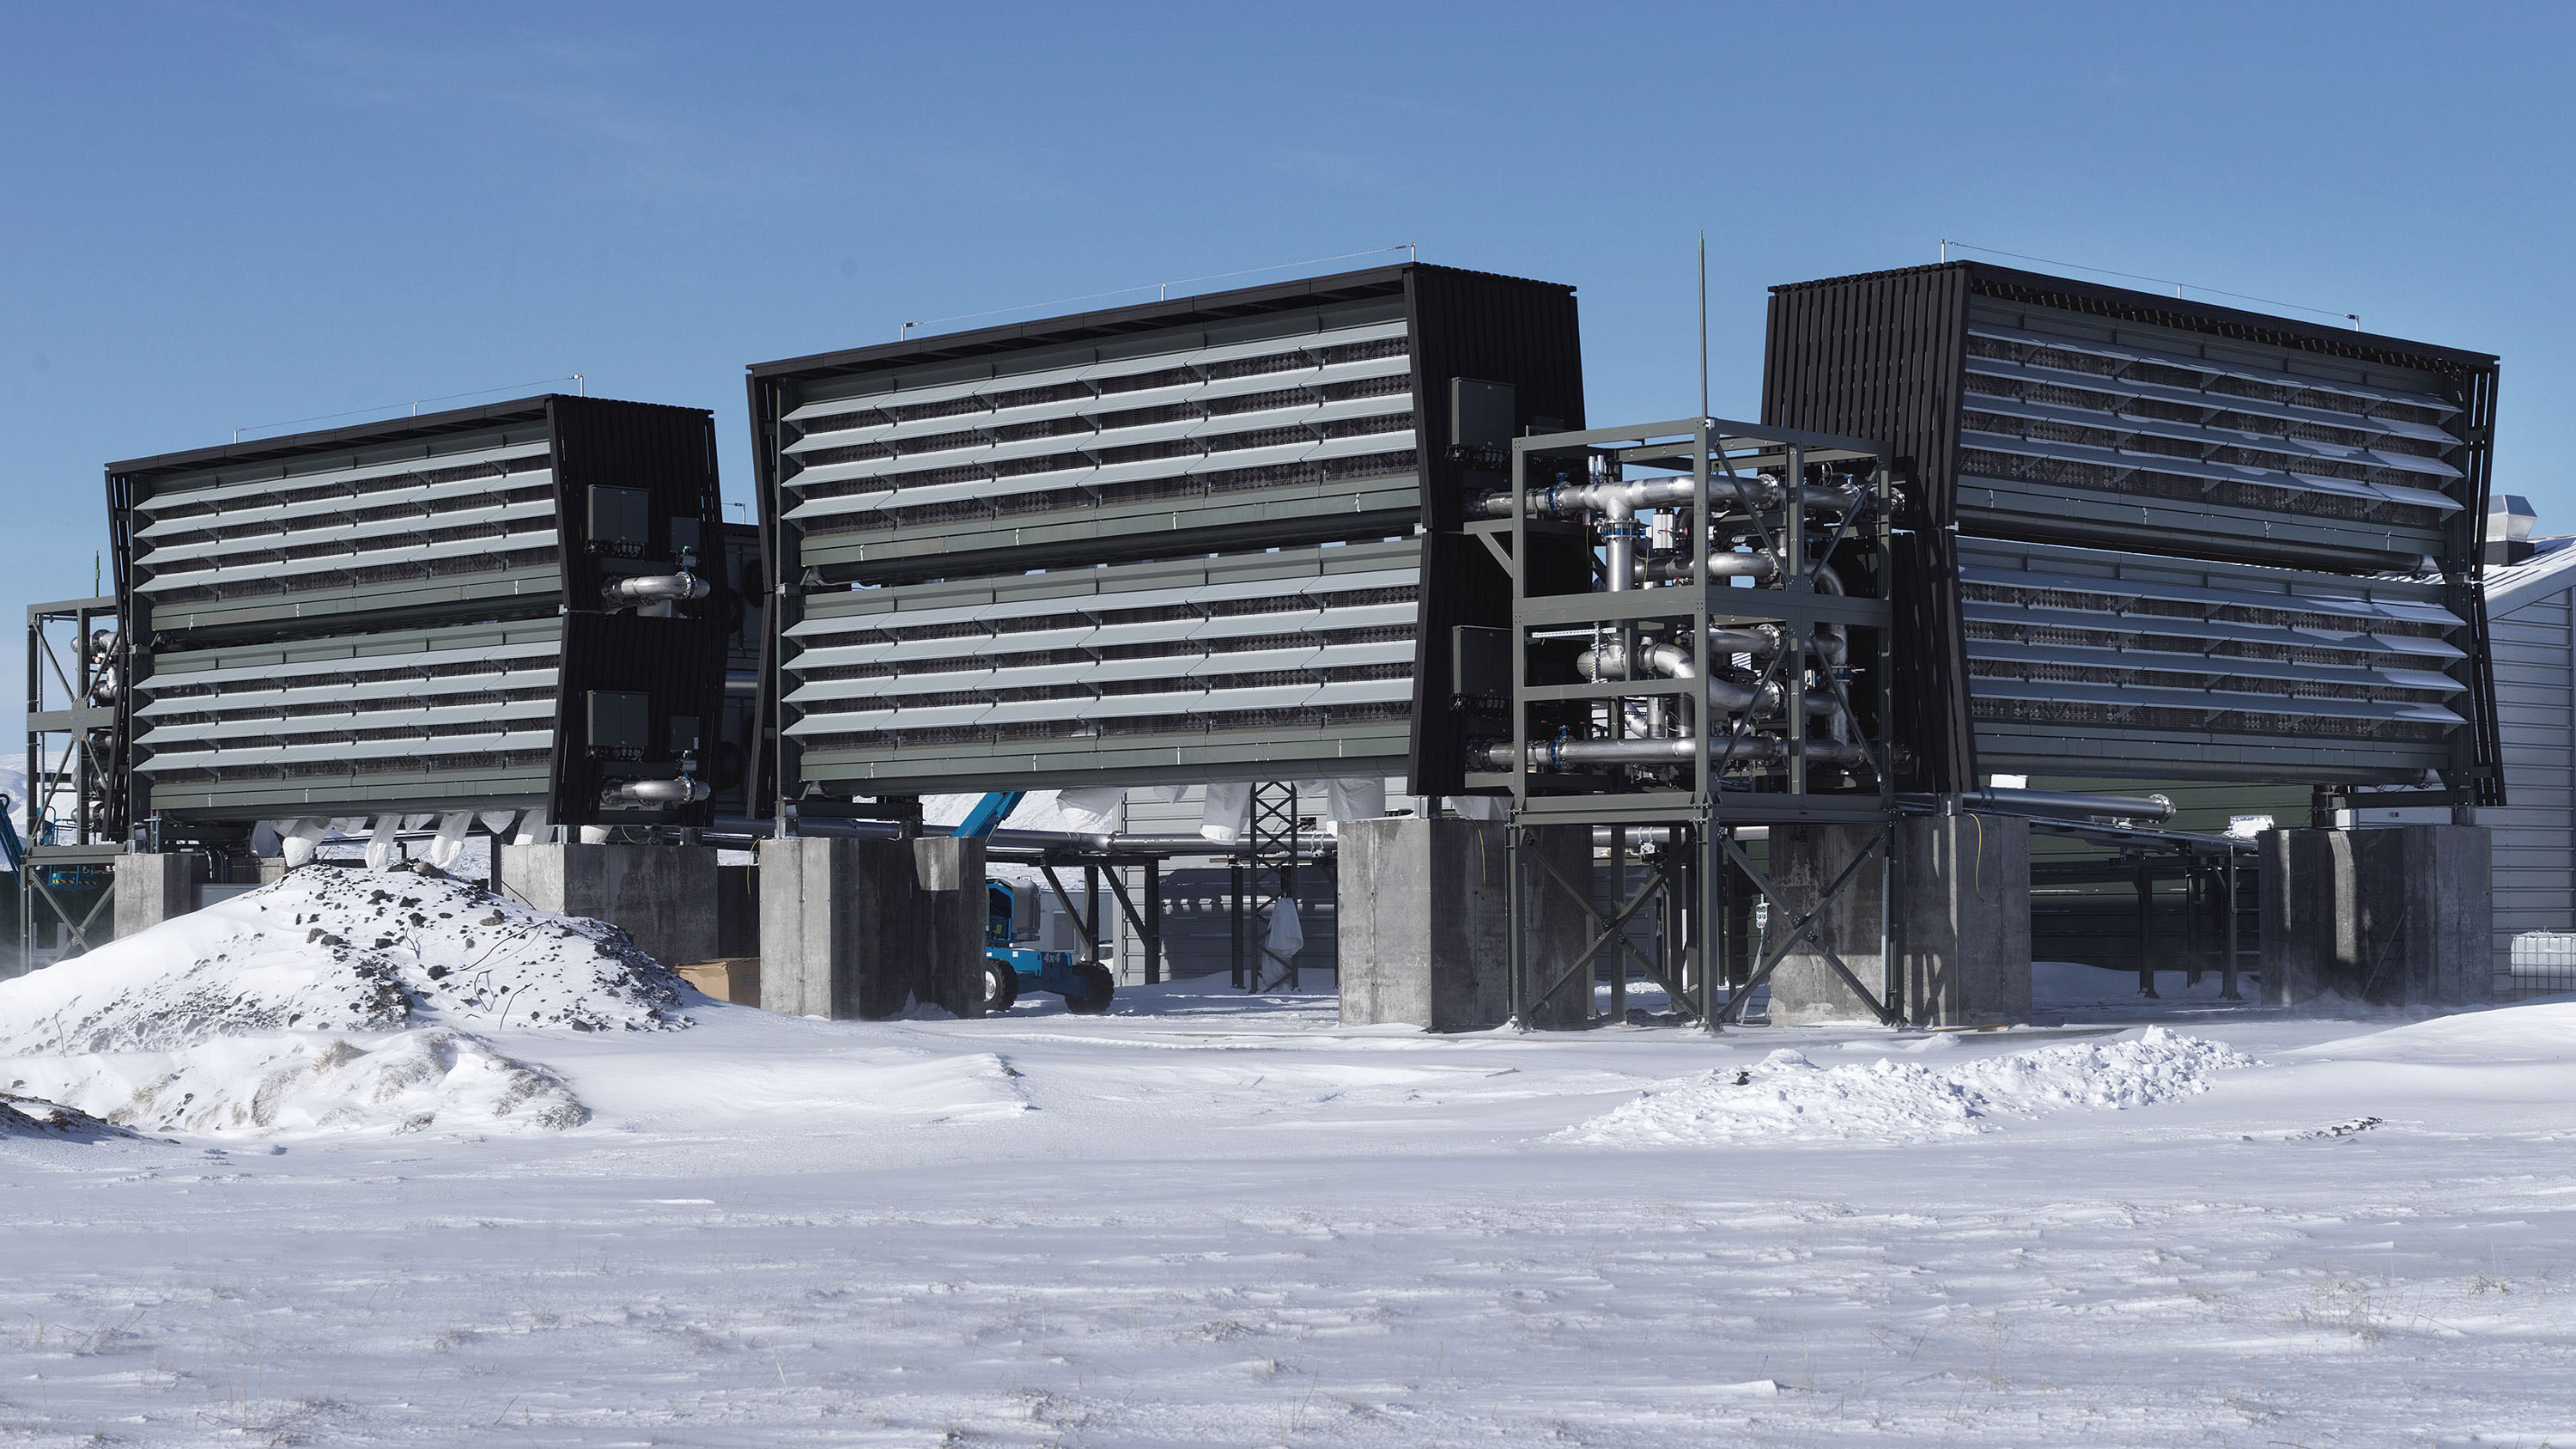 Climework's Orca plant in the snow of Iceland